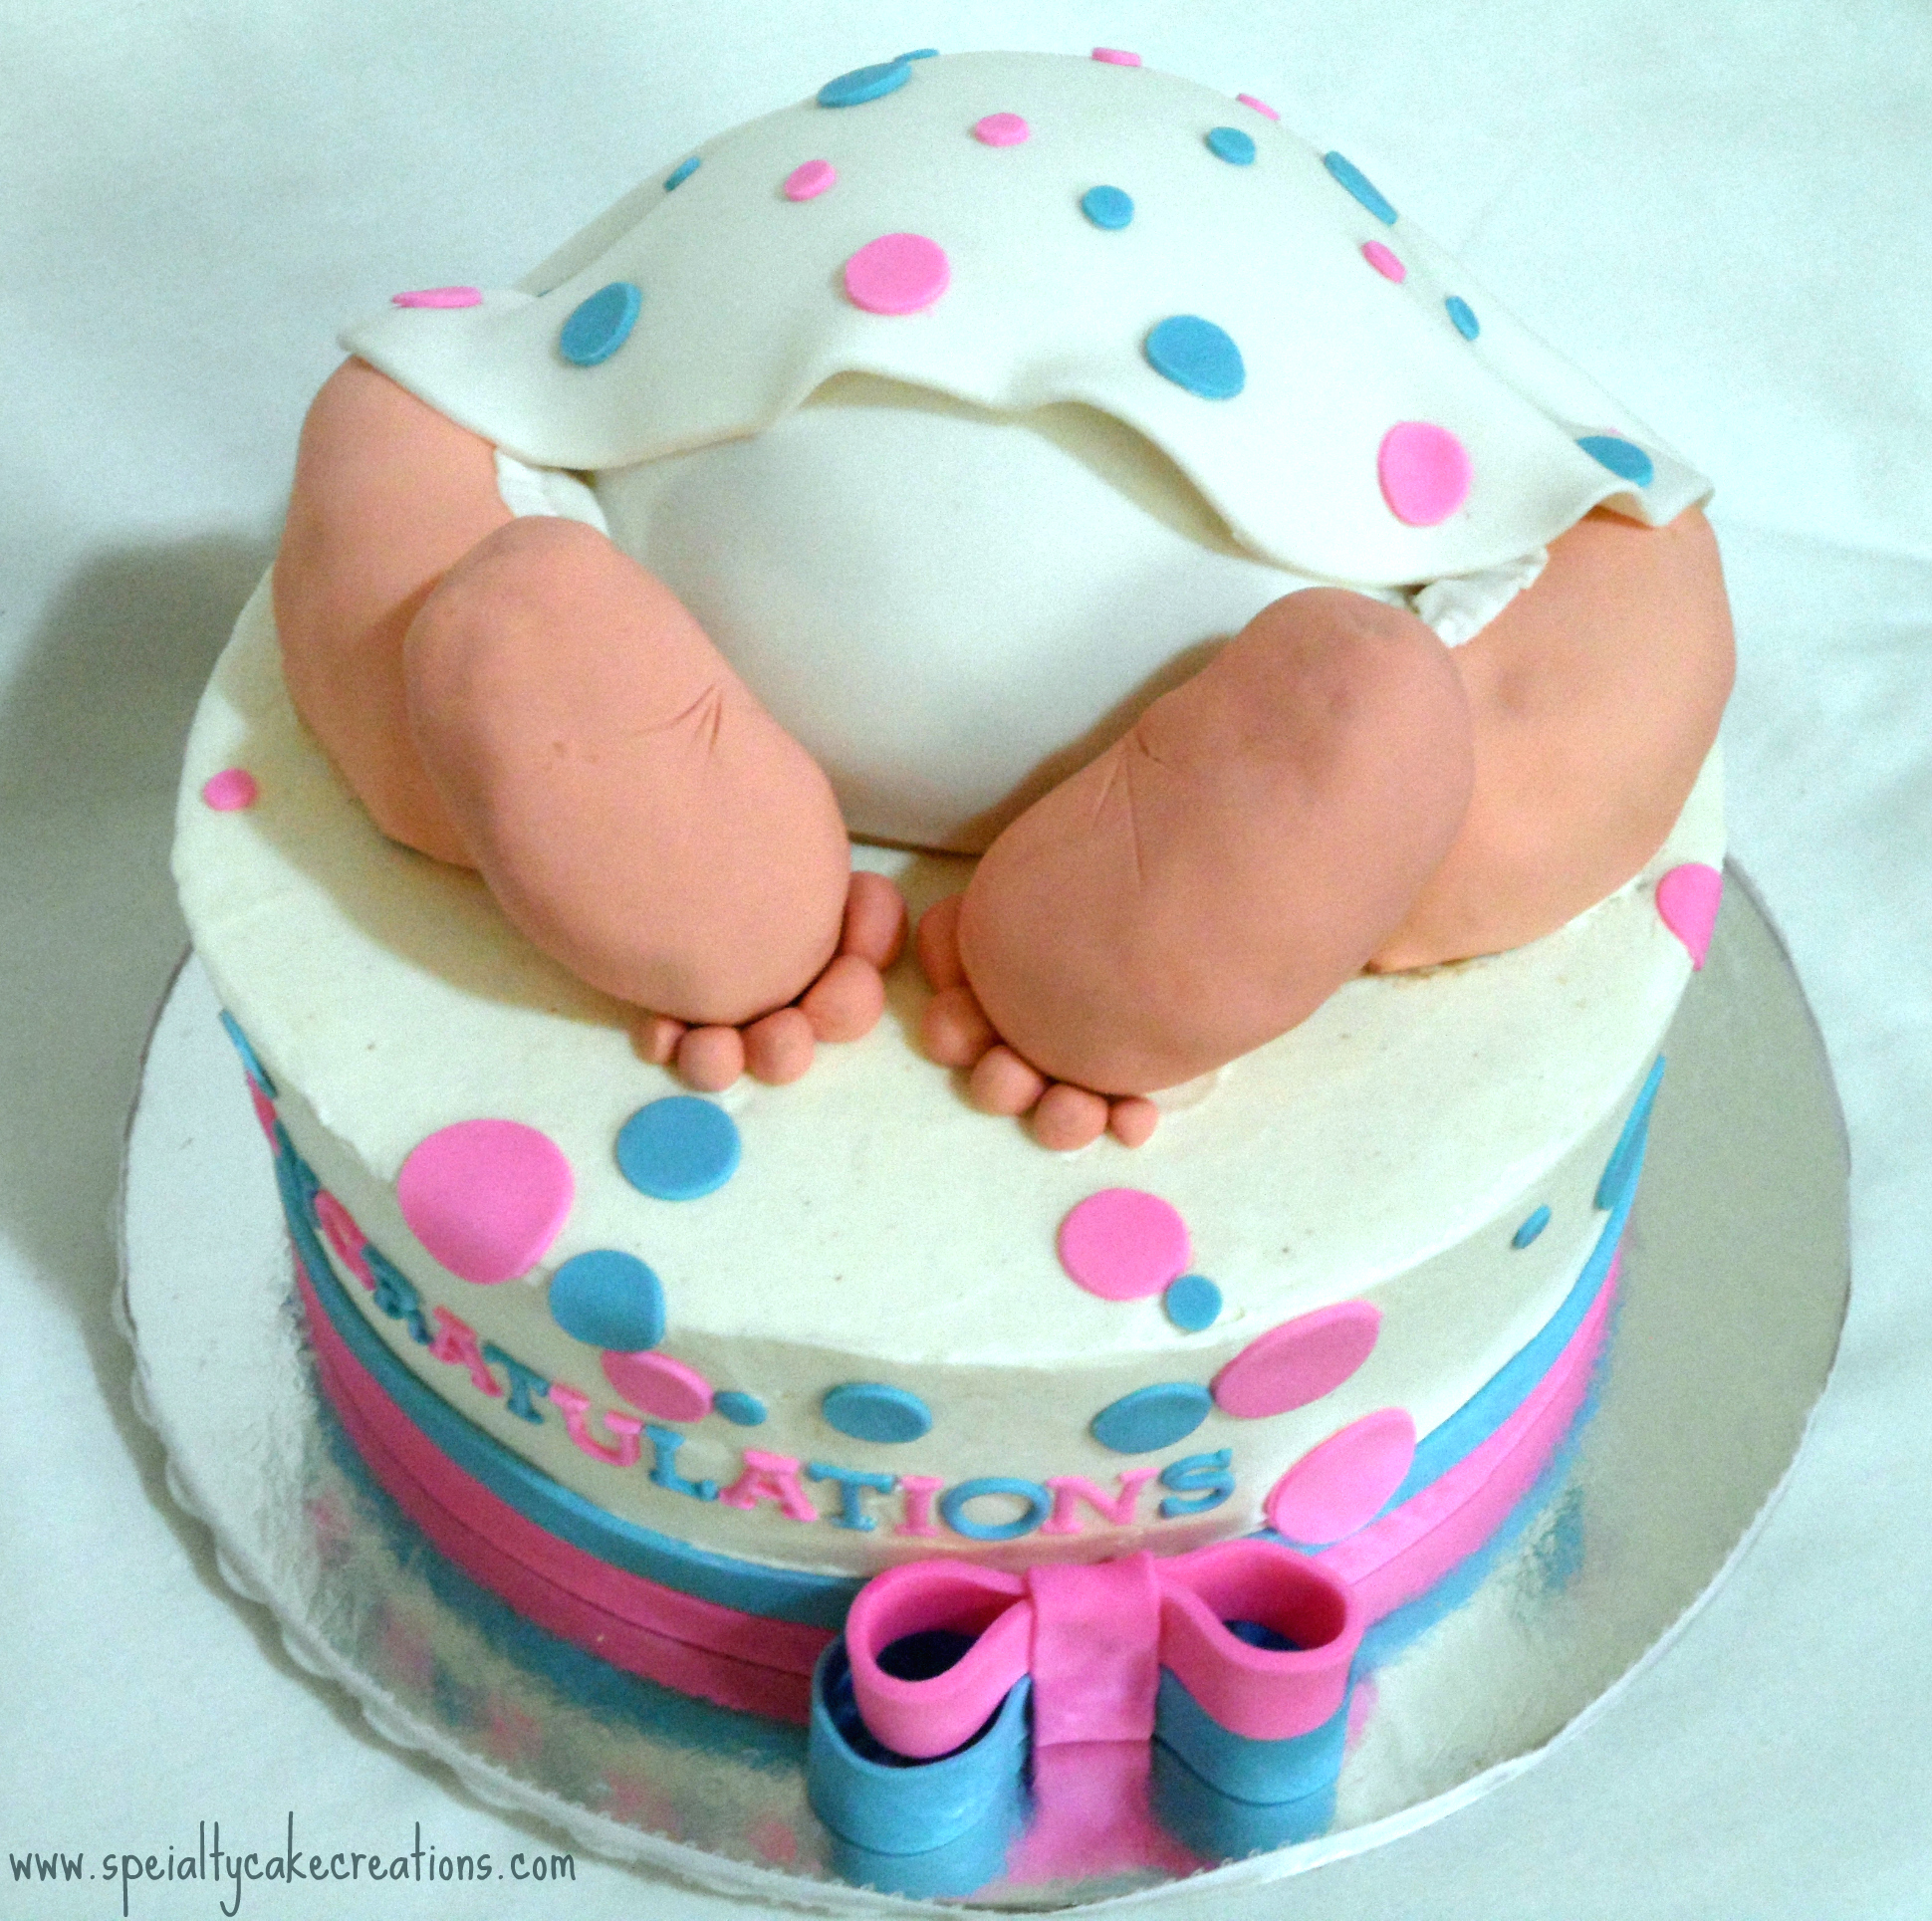 Specialty-Baby-Shower-Cake